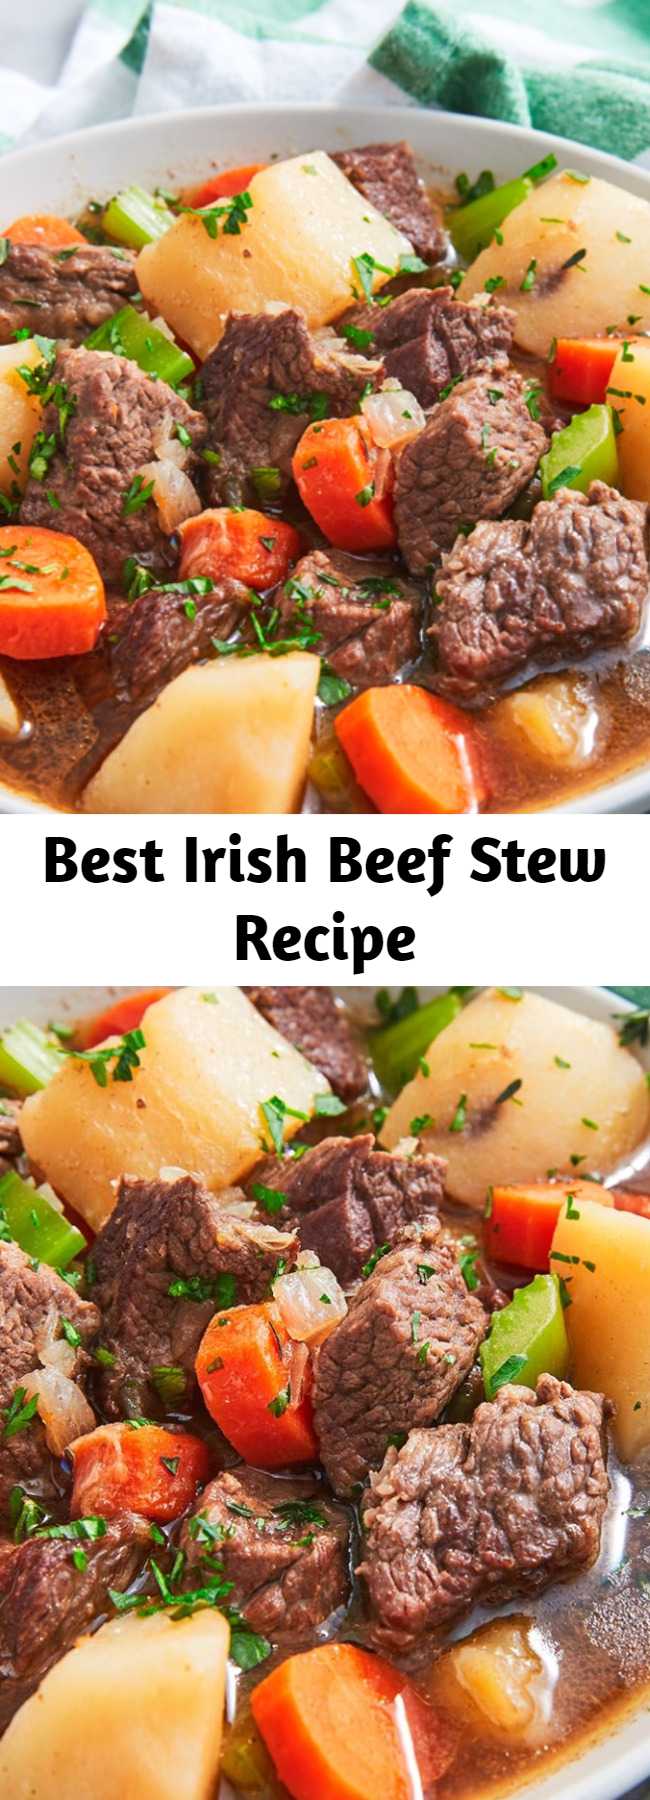 Best Irish Beef Stew Recipe - Traditionally, an Irish stew (aka Guinness Stew) is made with lamb, which you can totally do. We opted for beef chuck for simplicity and familiarity, but we think the Guinness and potatoes still qualify the stew as Irish. Whatever cut of meat you choose, this stew is absolutely delicious. Not too heavy, but still extremely filling.